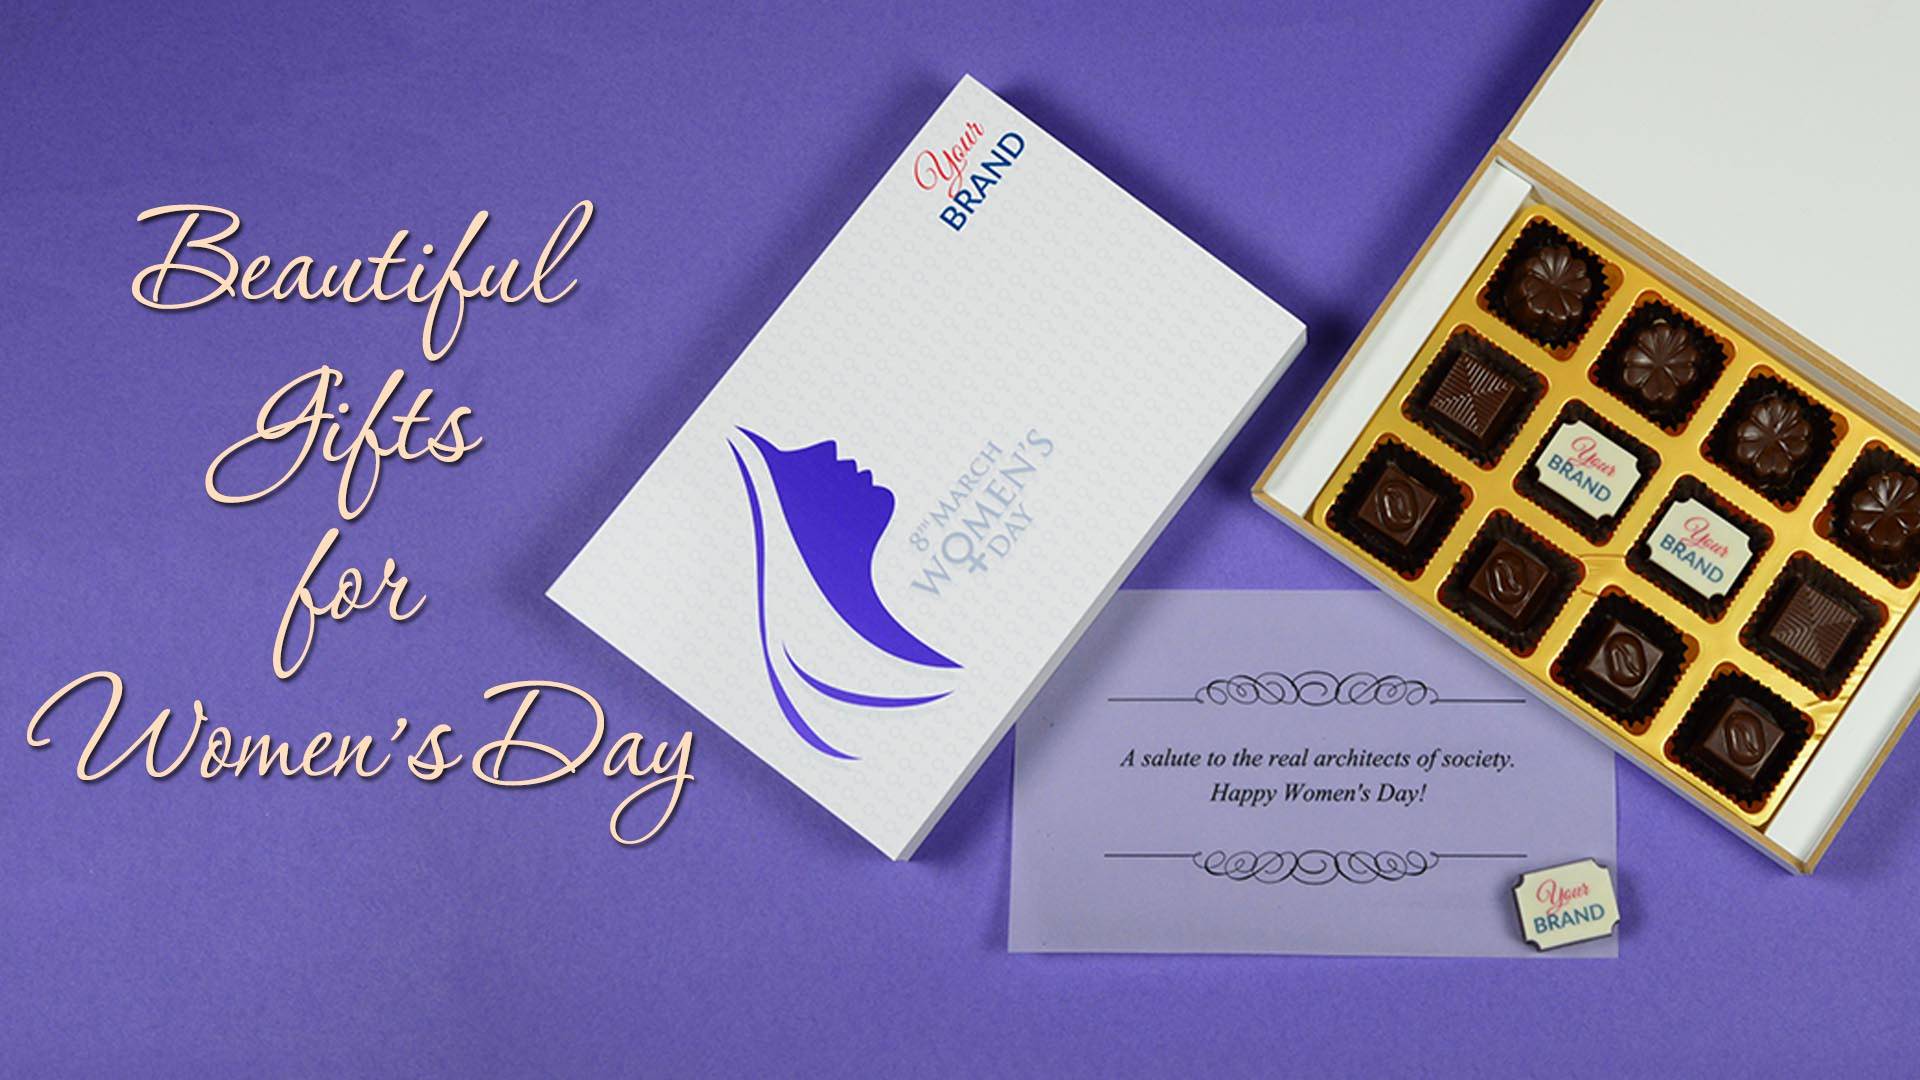 corporate gifts for women's day